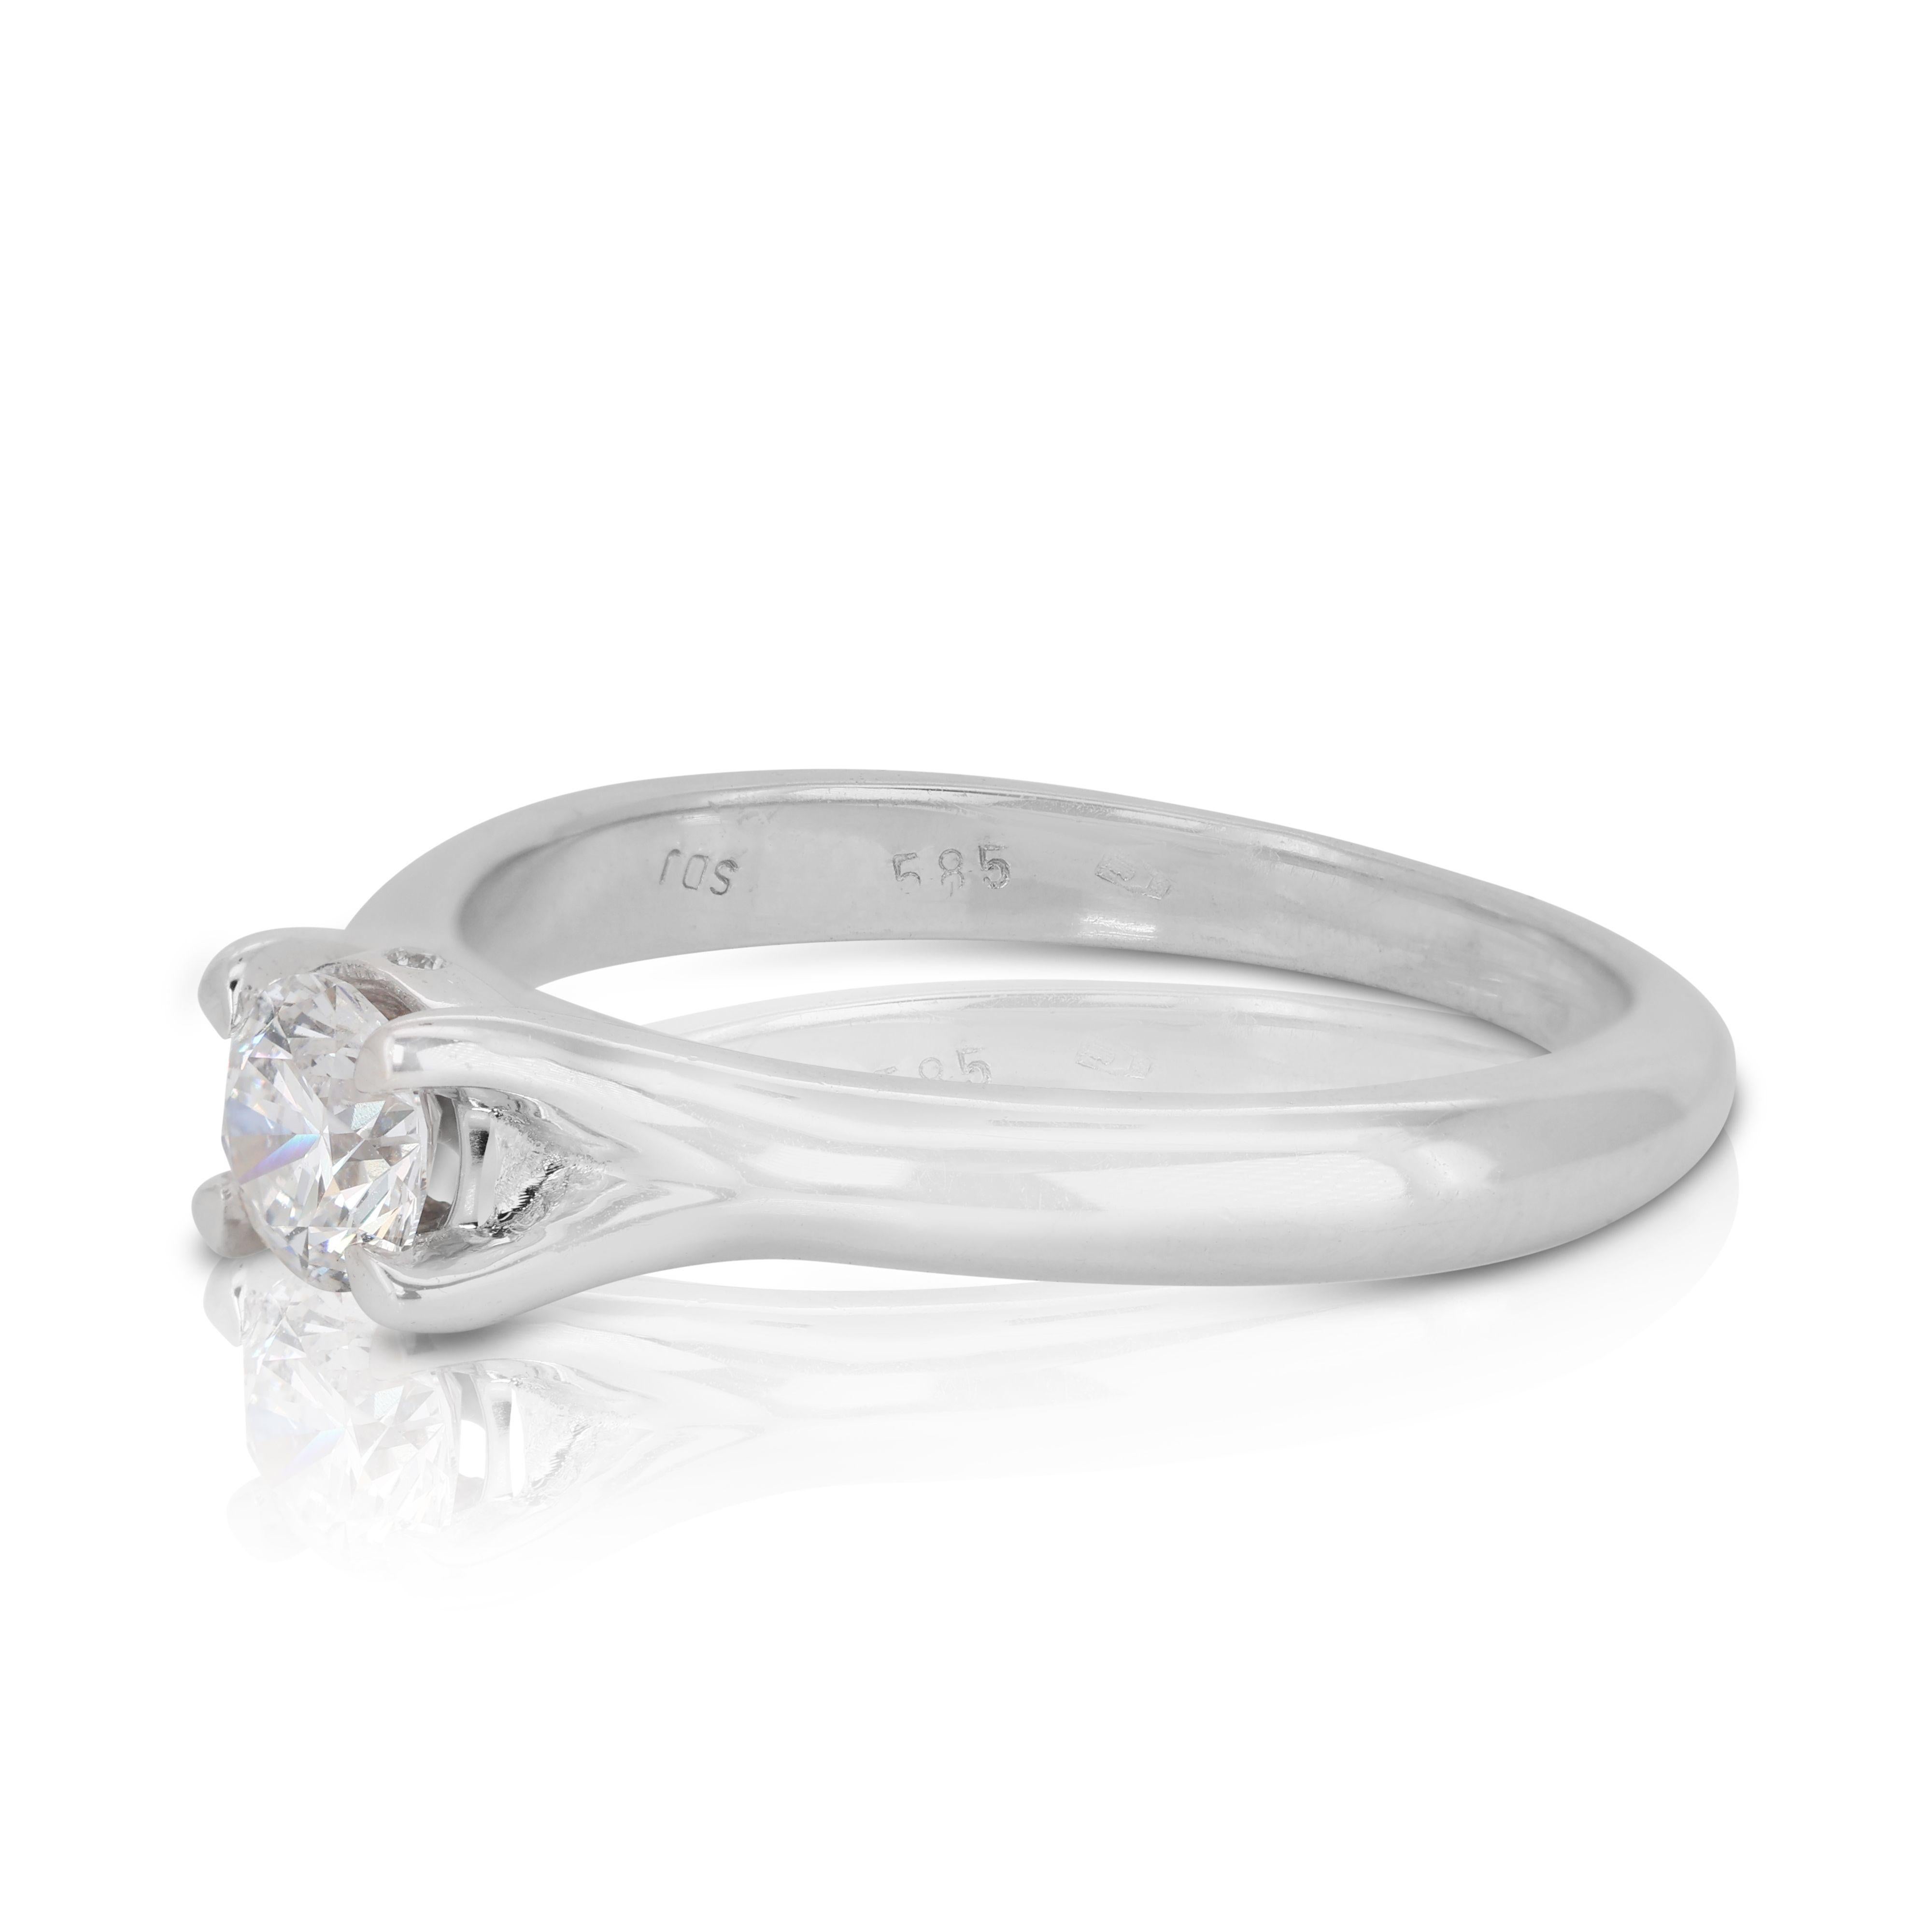 Women's Classic 14K White Gold Solitaire Ring with 0.35ct Natural DiamondsDianoche Pte L For Sale